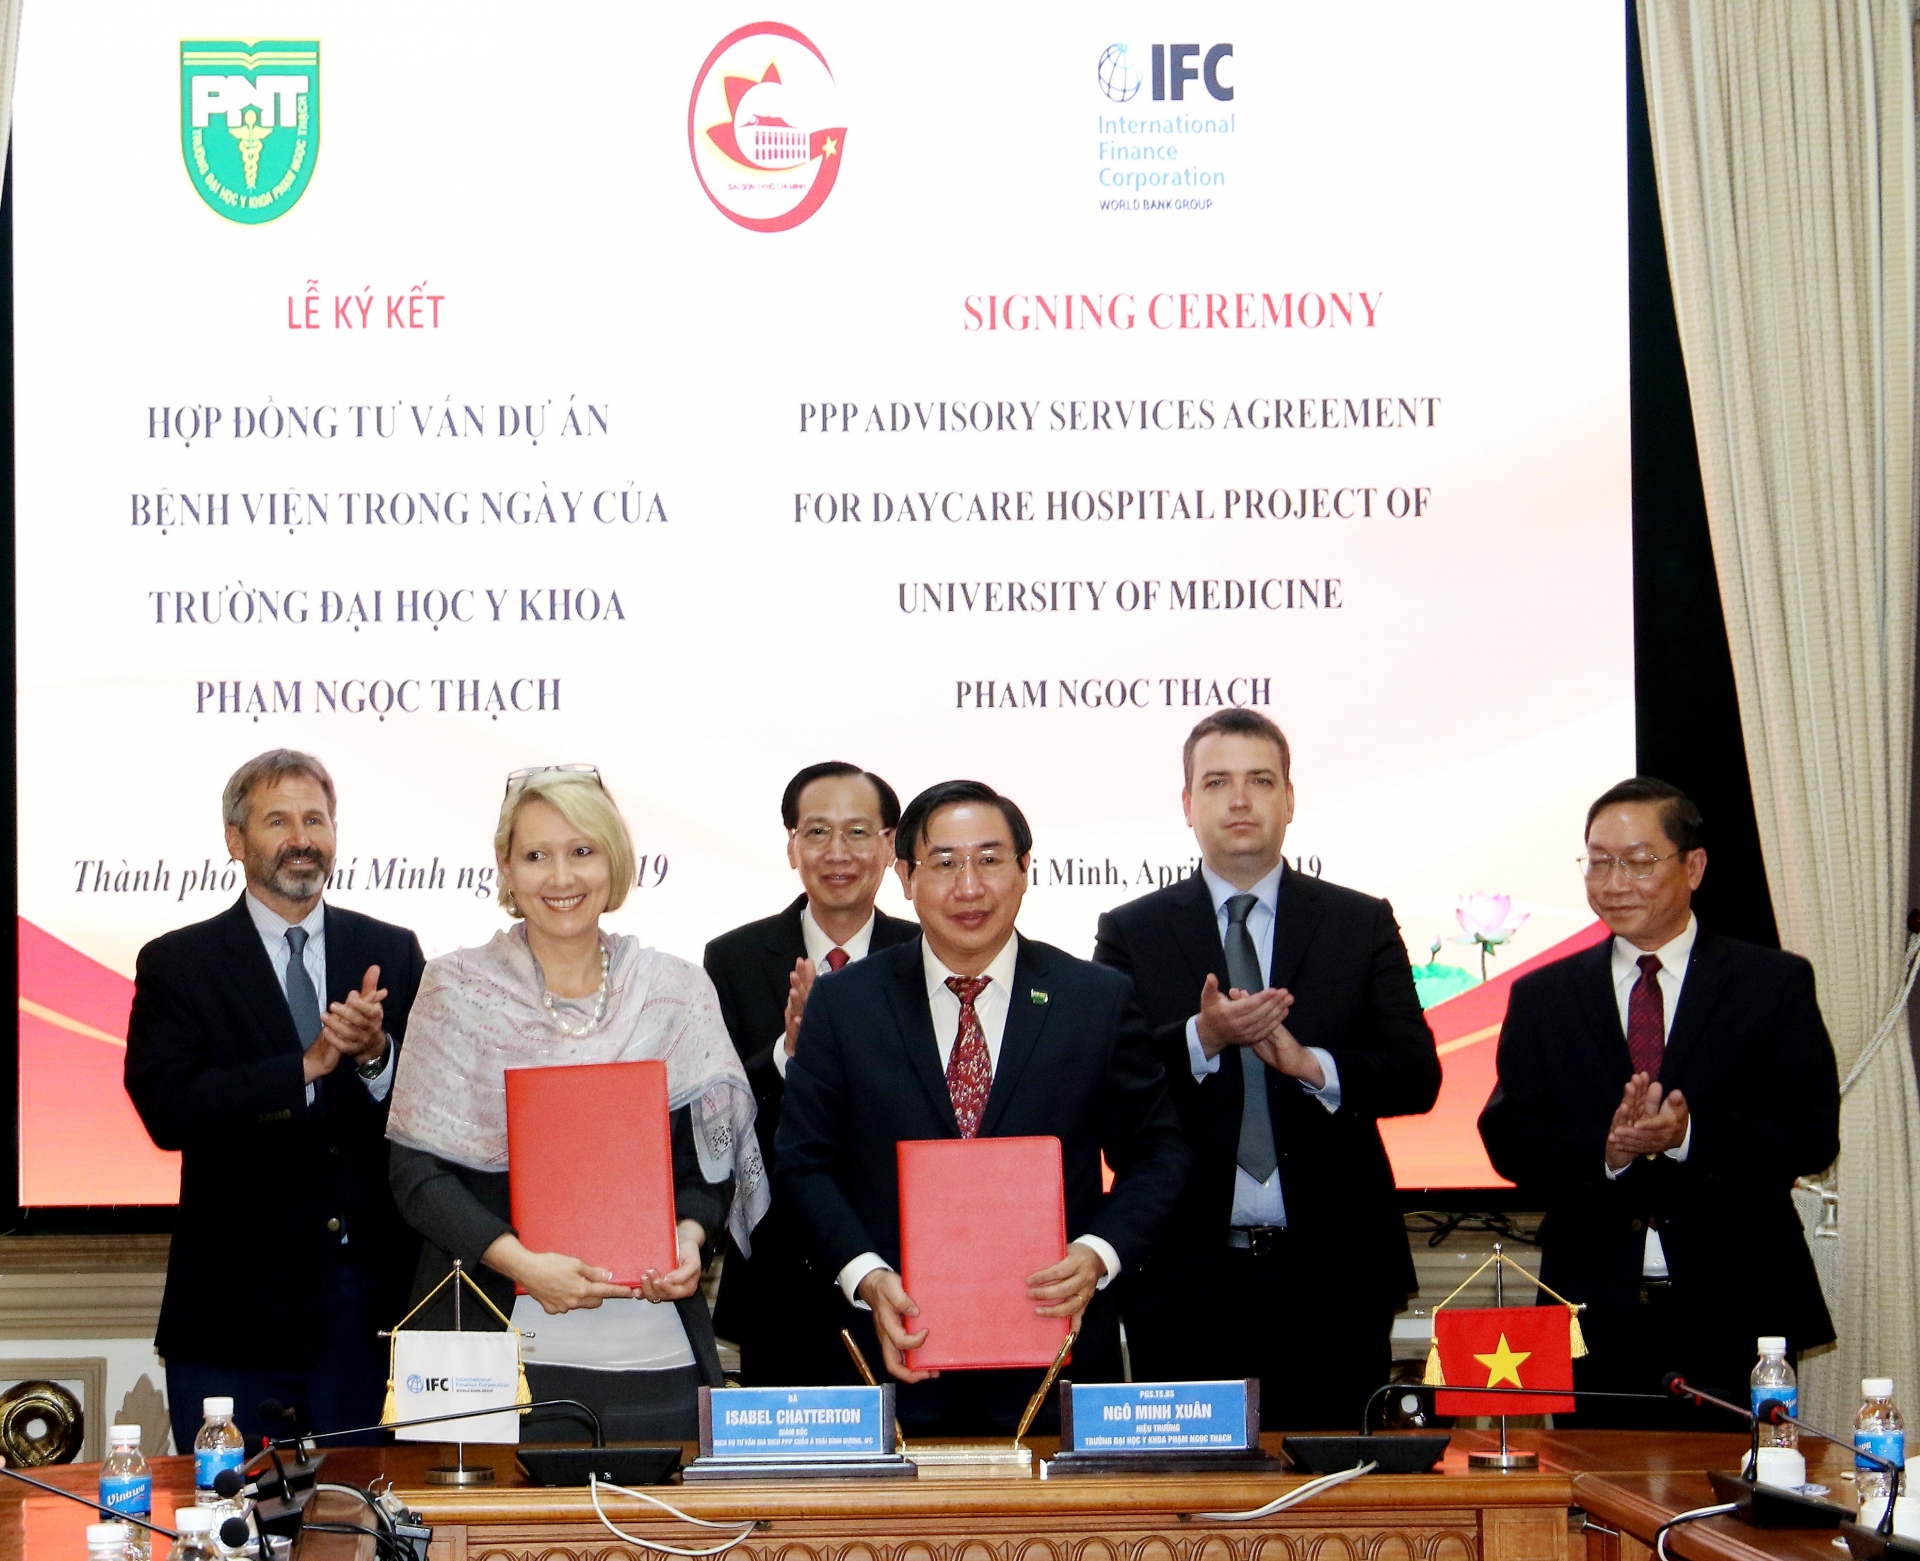 IFC to assist Ho Chi Minh City to develop PPP healthcare facility